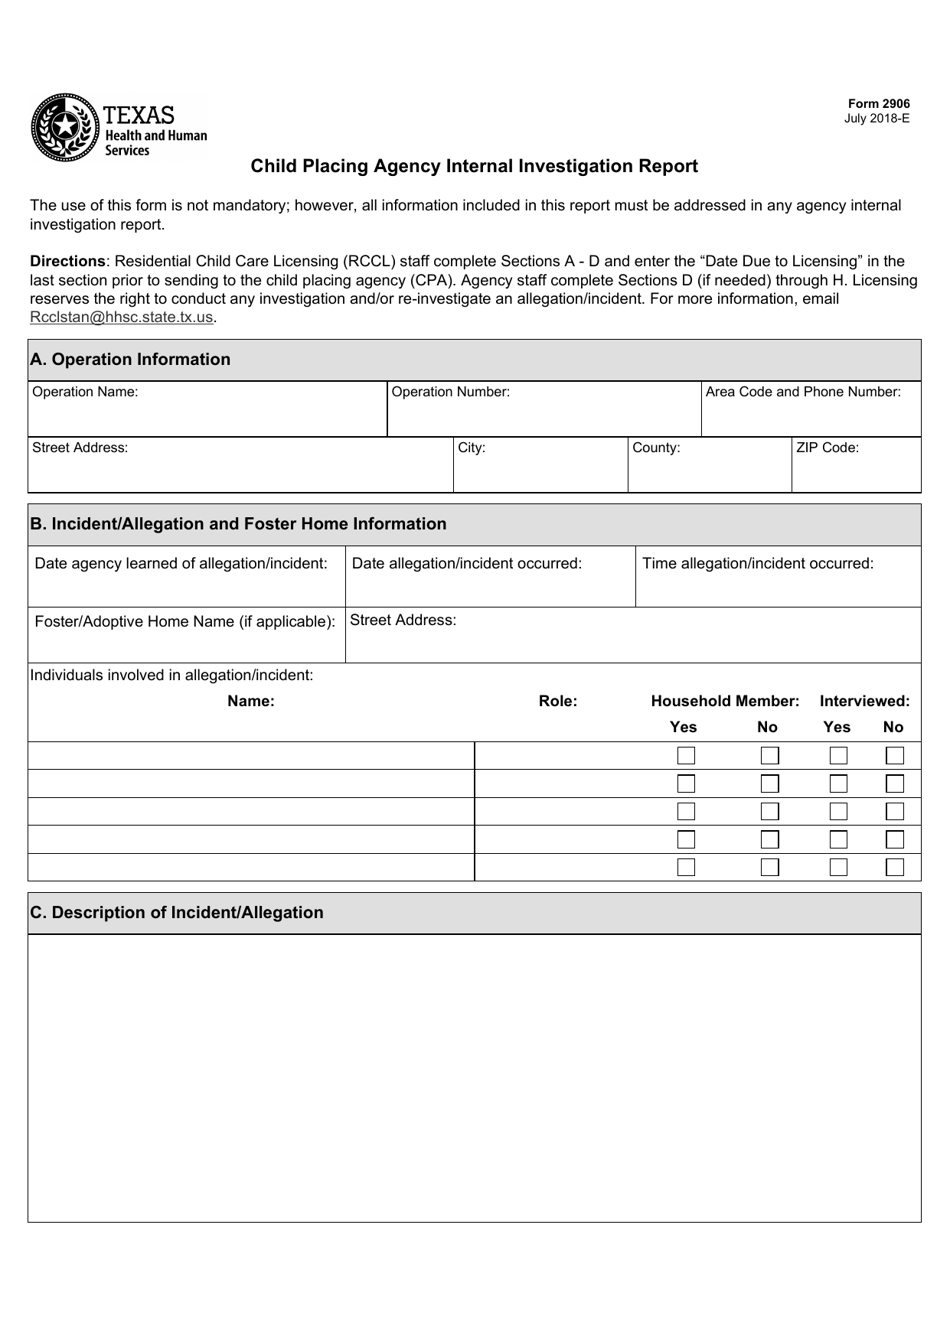 Form 2906 Child Placing Agency Internal Investigation Report - Texas, Page 1